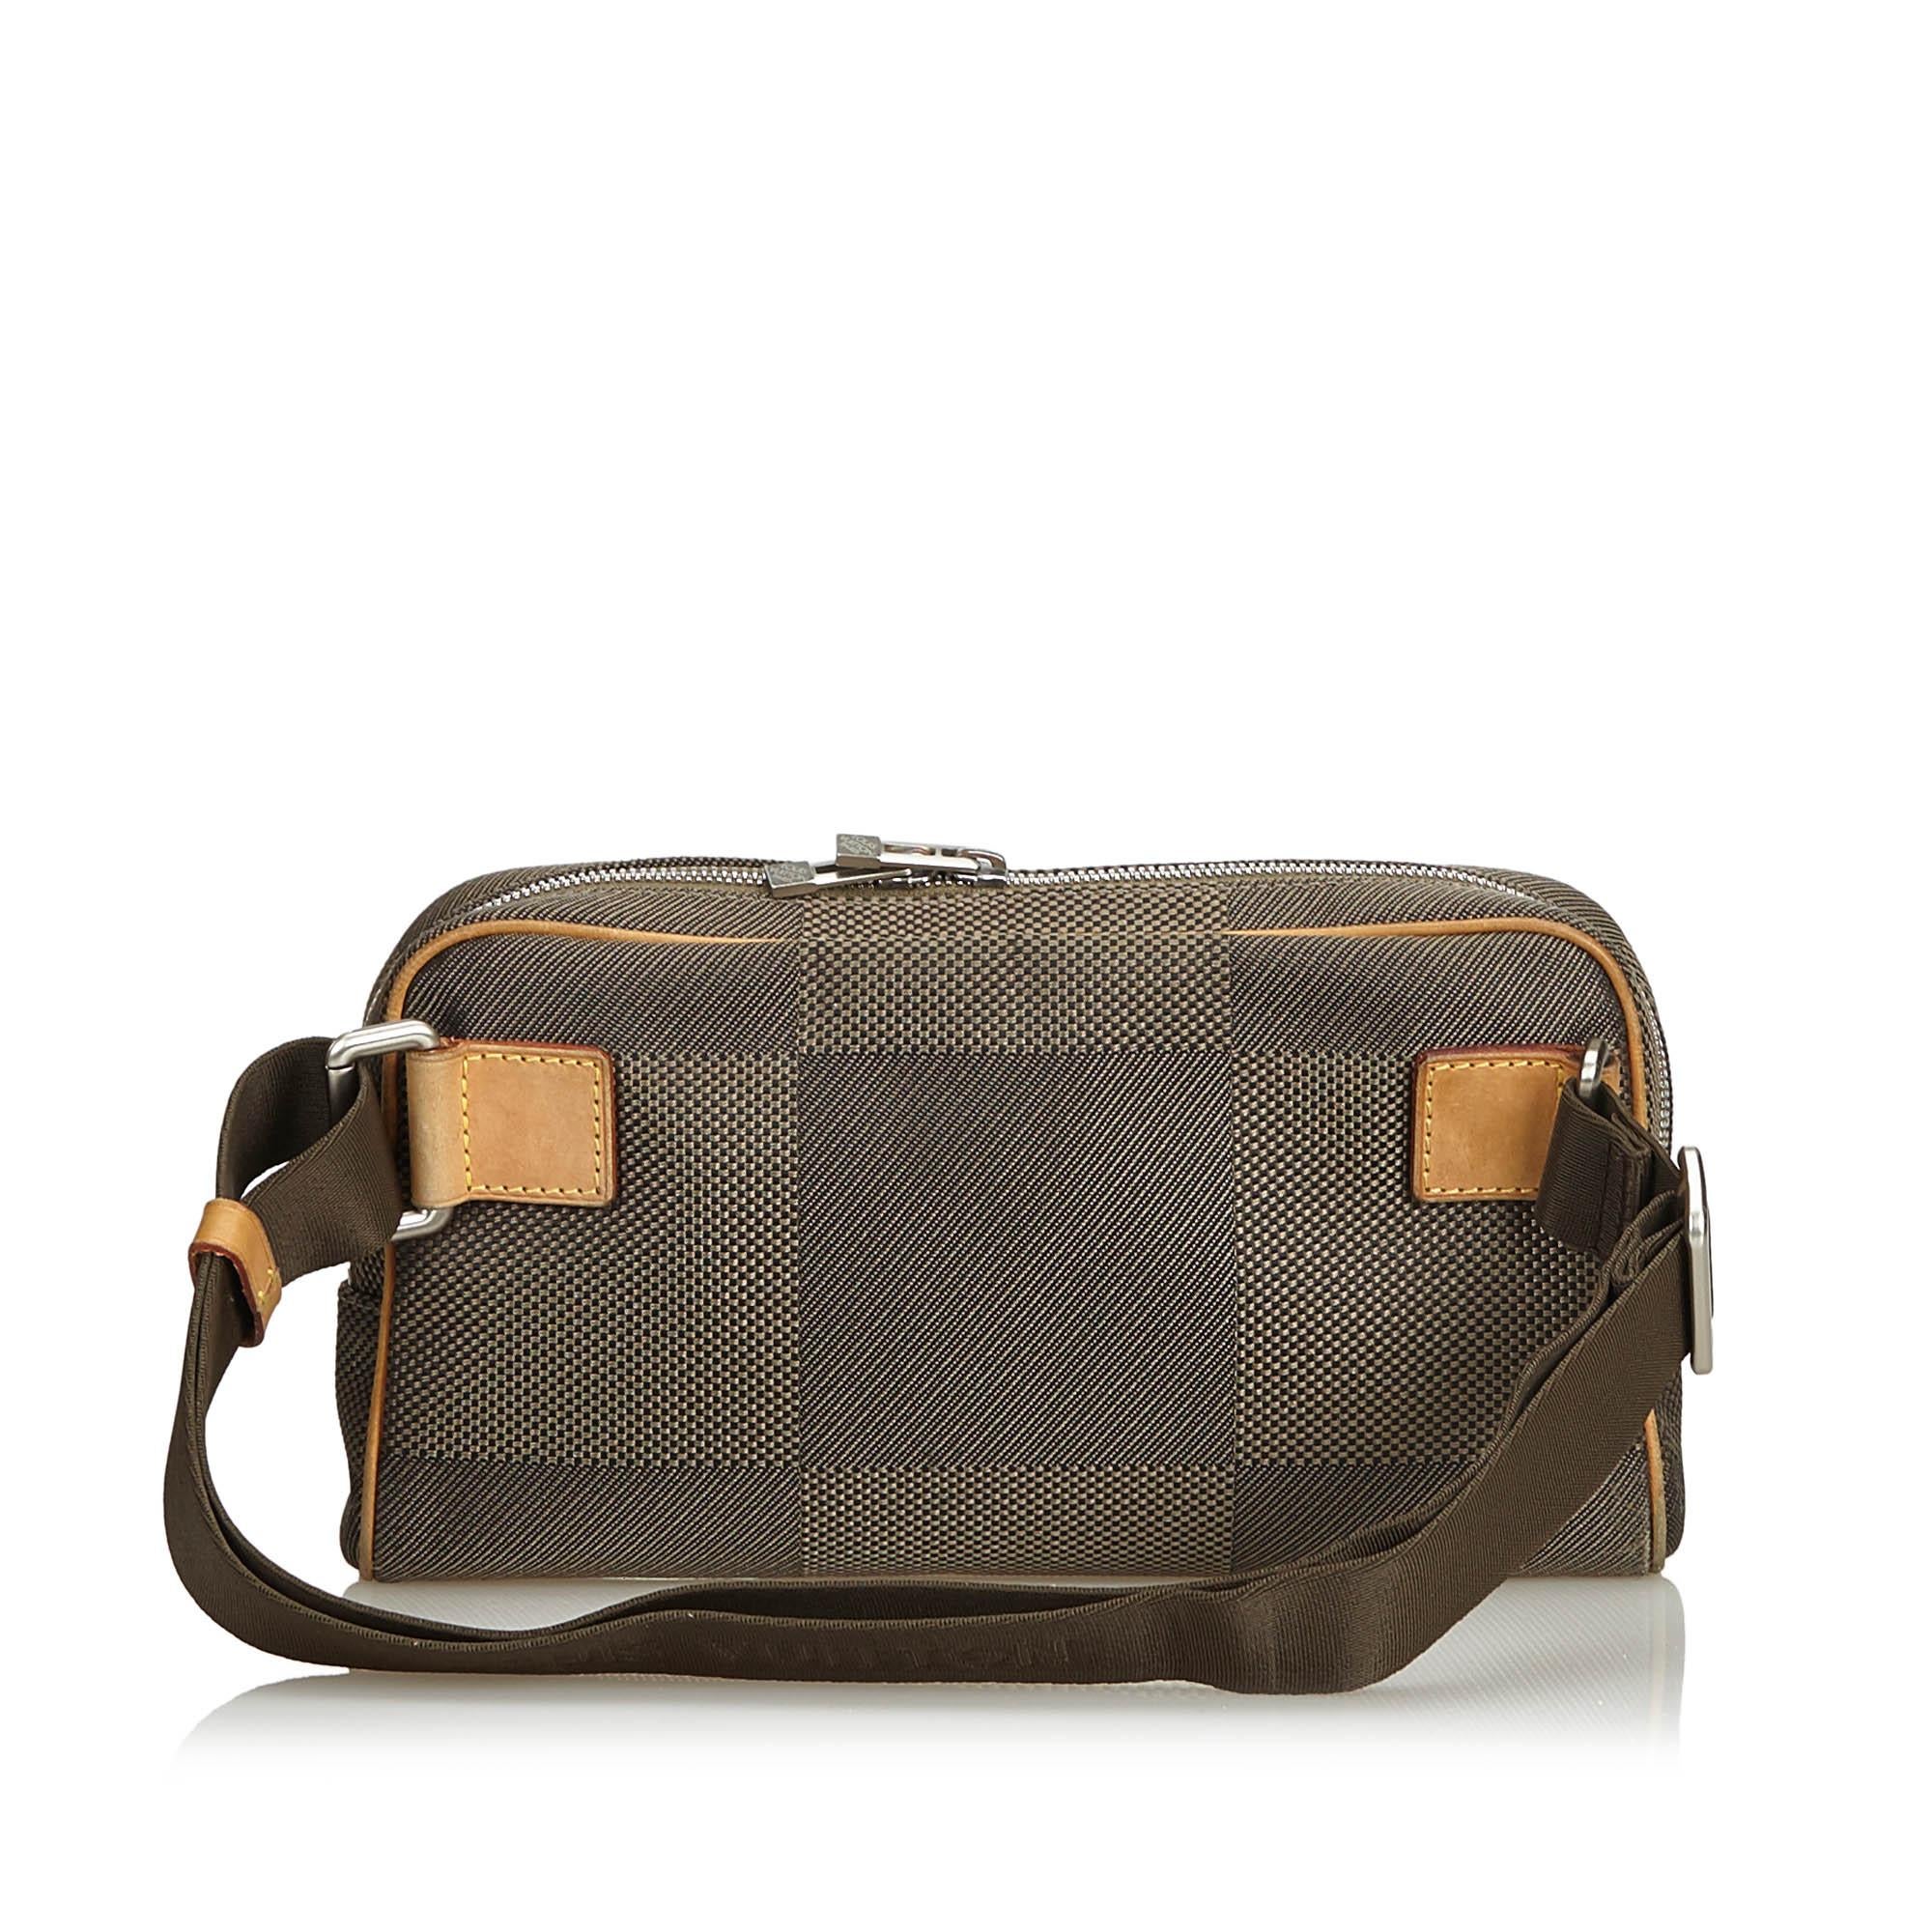 Louis Vuitton Gray Damier Geant Acrobate Waist Bag In Good Condition For Sale In Orlando, FL